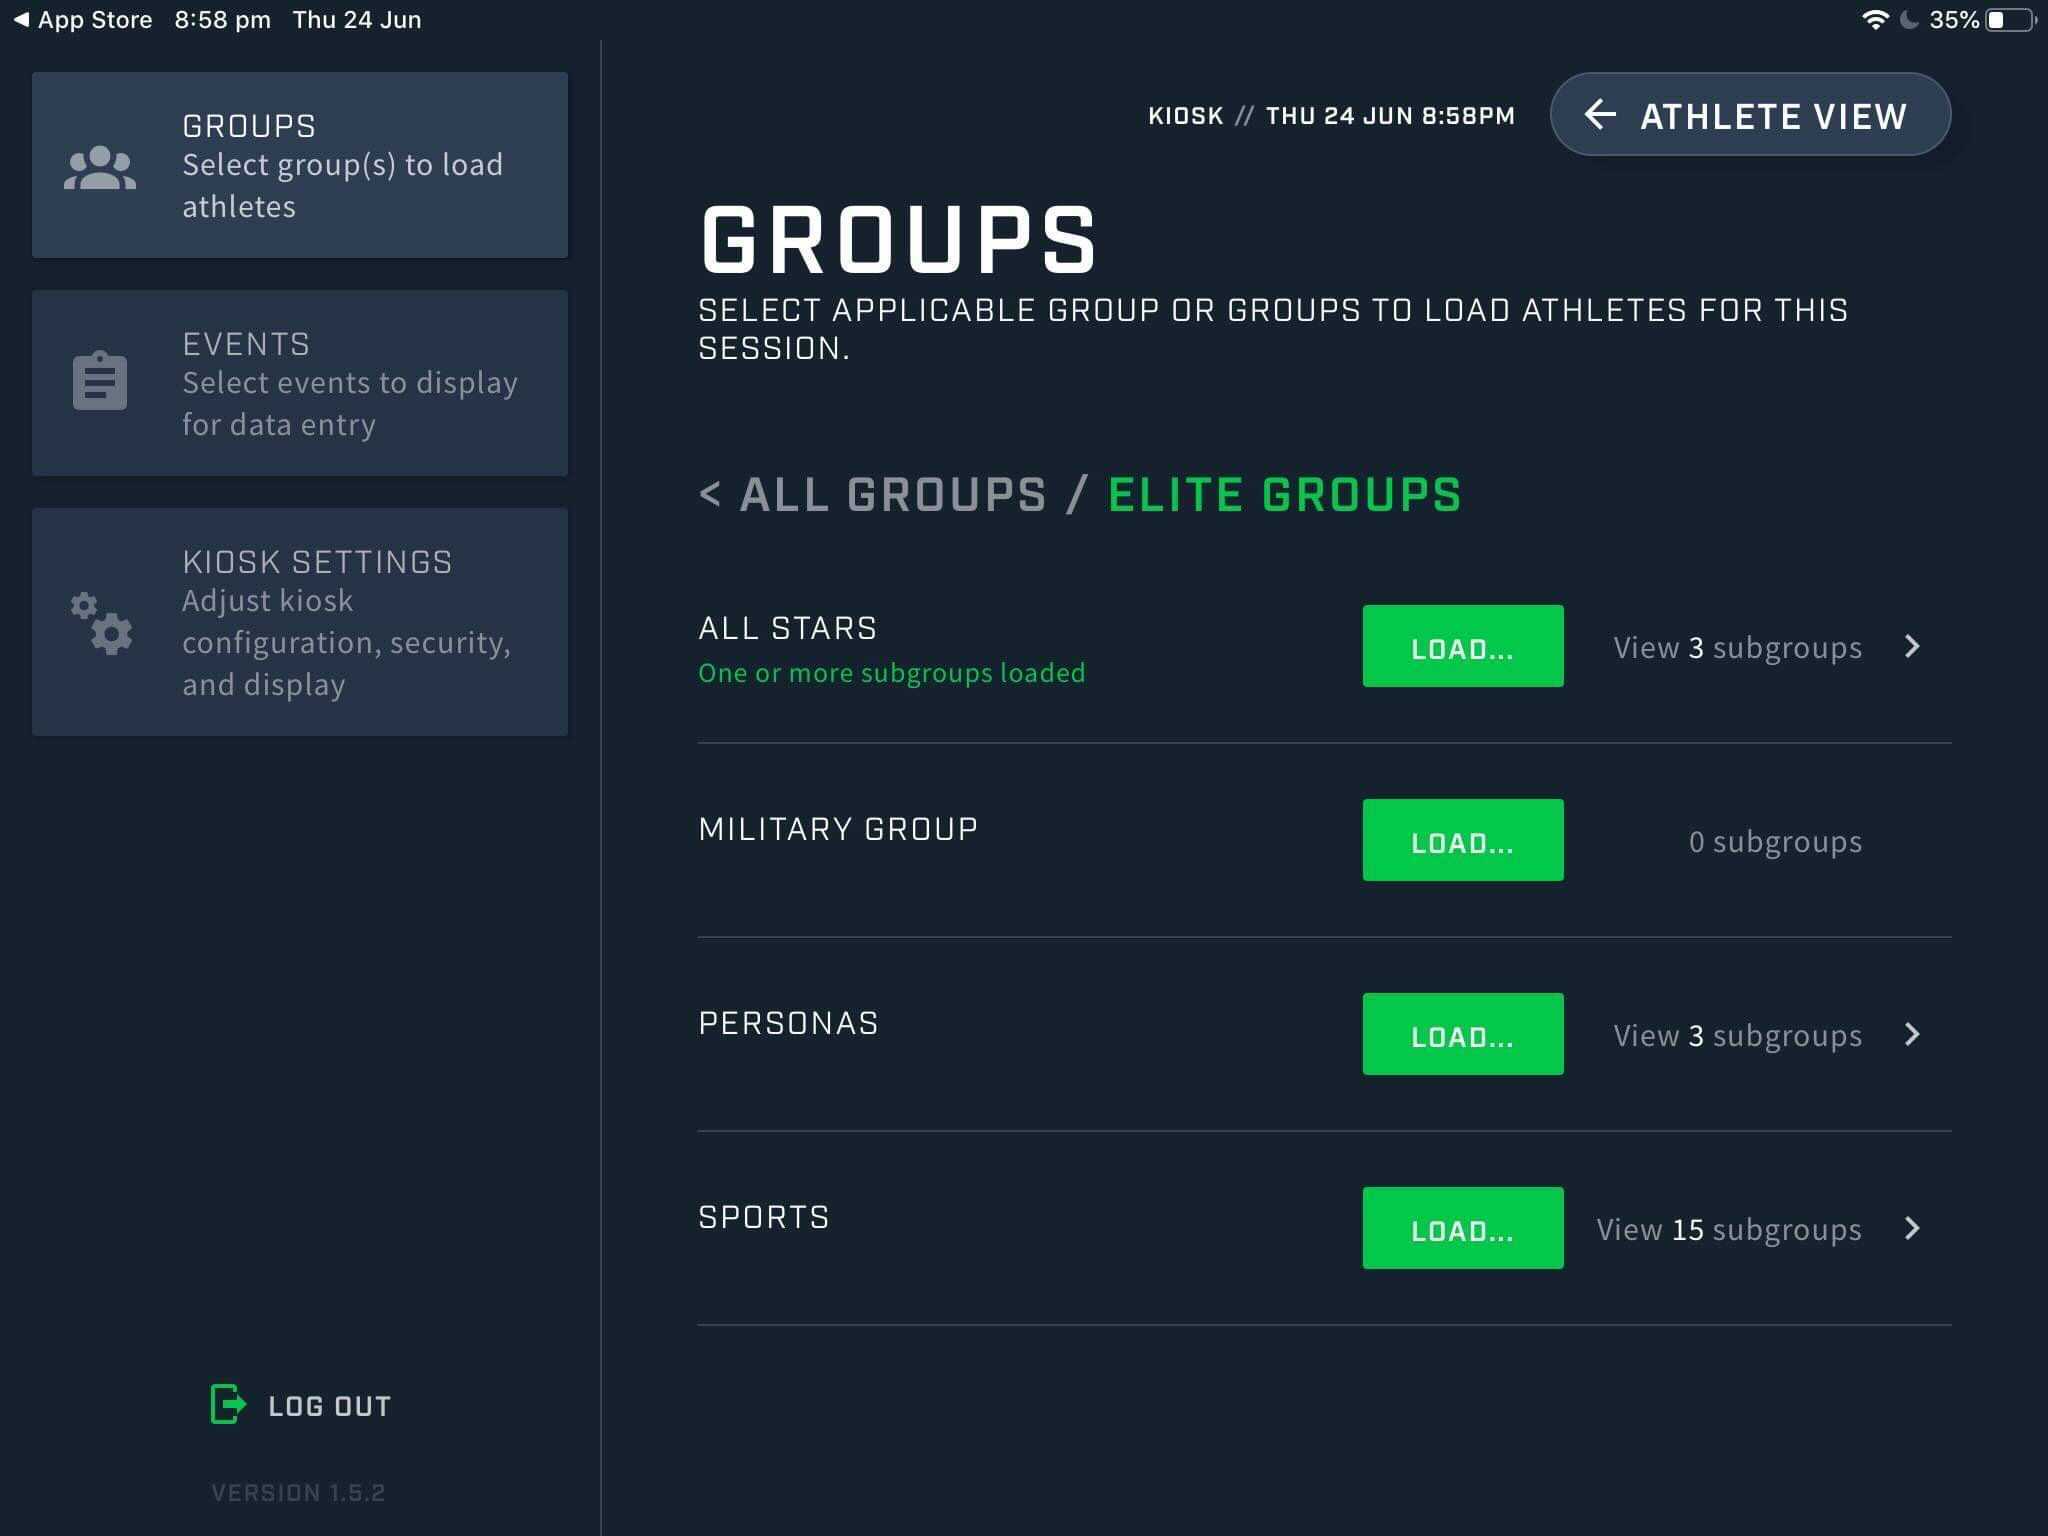 A screenshot of the Groups page on the Kiosk app